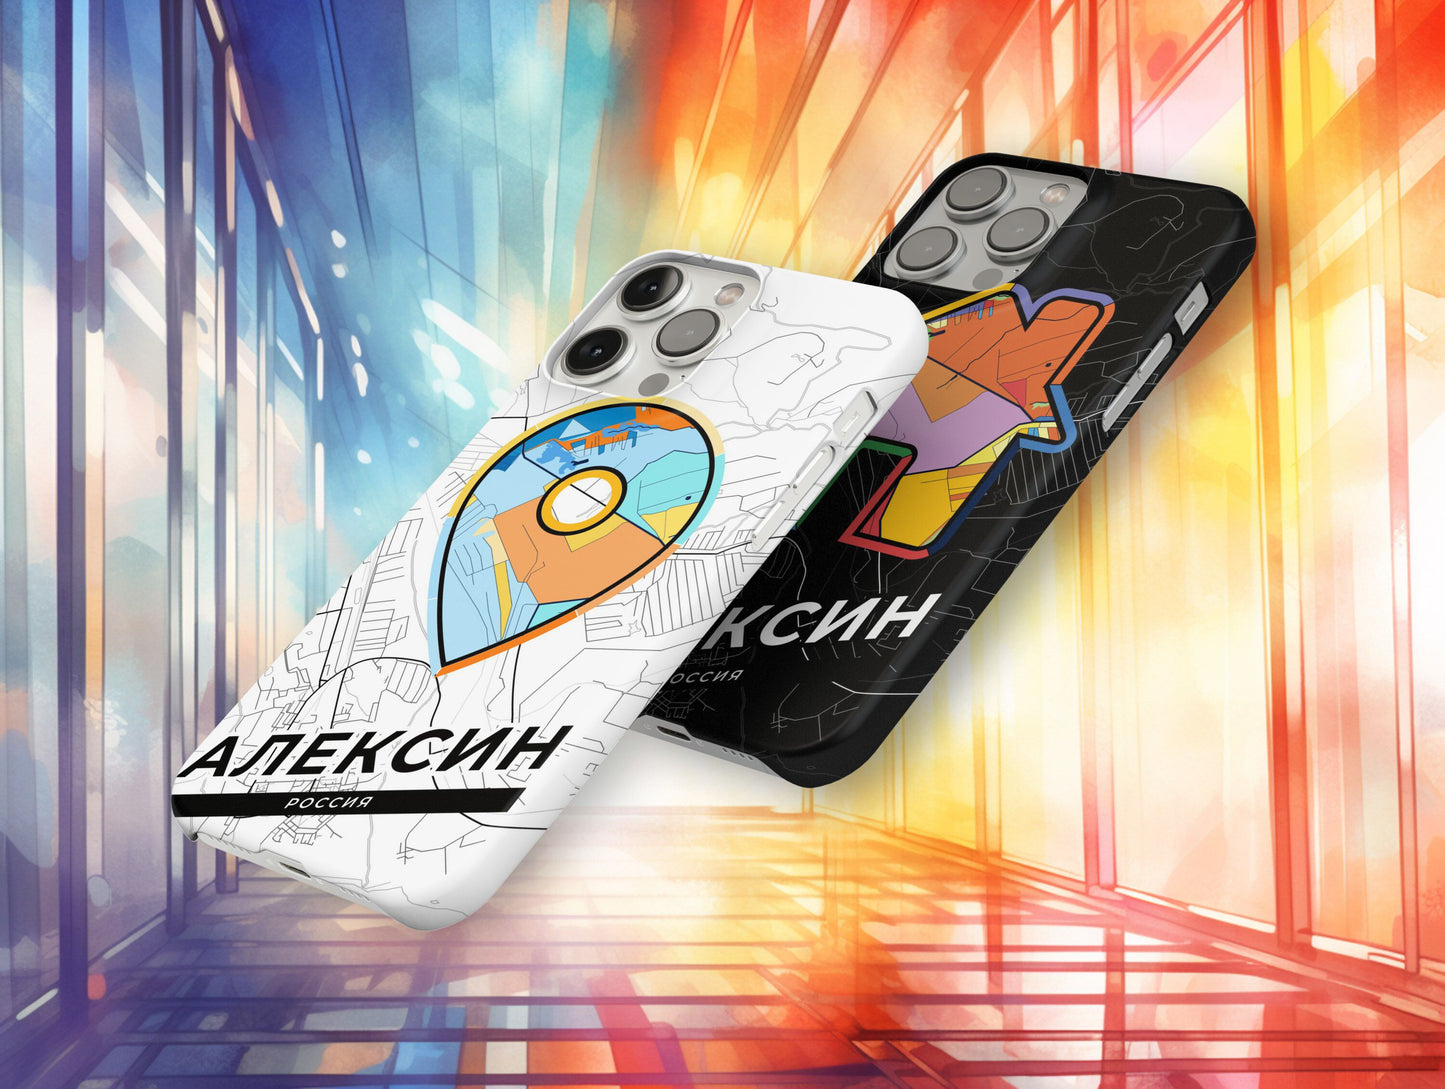 Aleksin Russia slim phone case with colorful icon. Birthday, wedding or housewarming gift. Couple match cases.